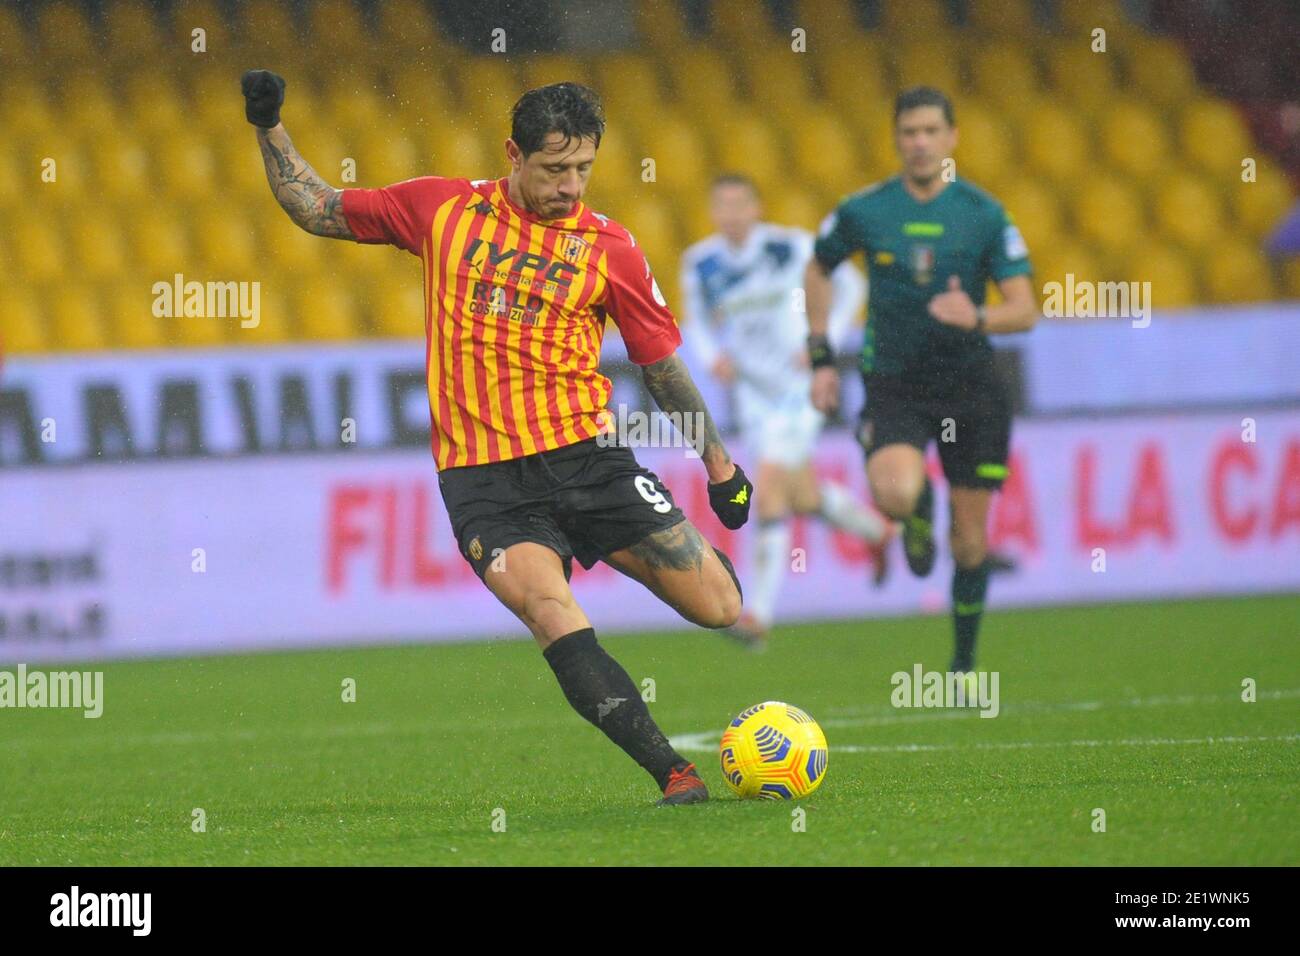 Benevento, Italy. 09th Jan, 2021. Gianluca Lapadula (Benevento Calcio)  during Benevento Calcio vs Atalanta BC, Italian football Serie A match in  benevento, Italy, January 09 2021 Credit: Independent Photo Agency/Alamy  Live News